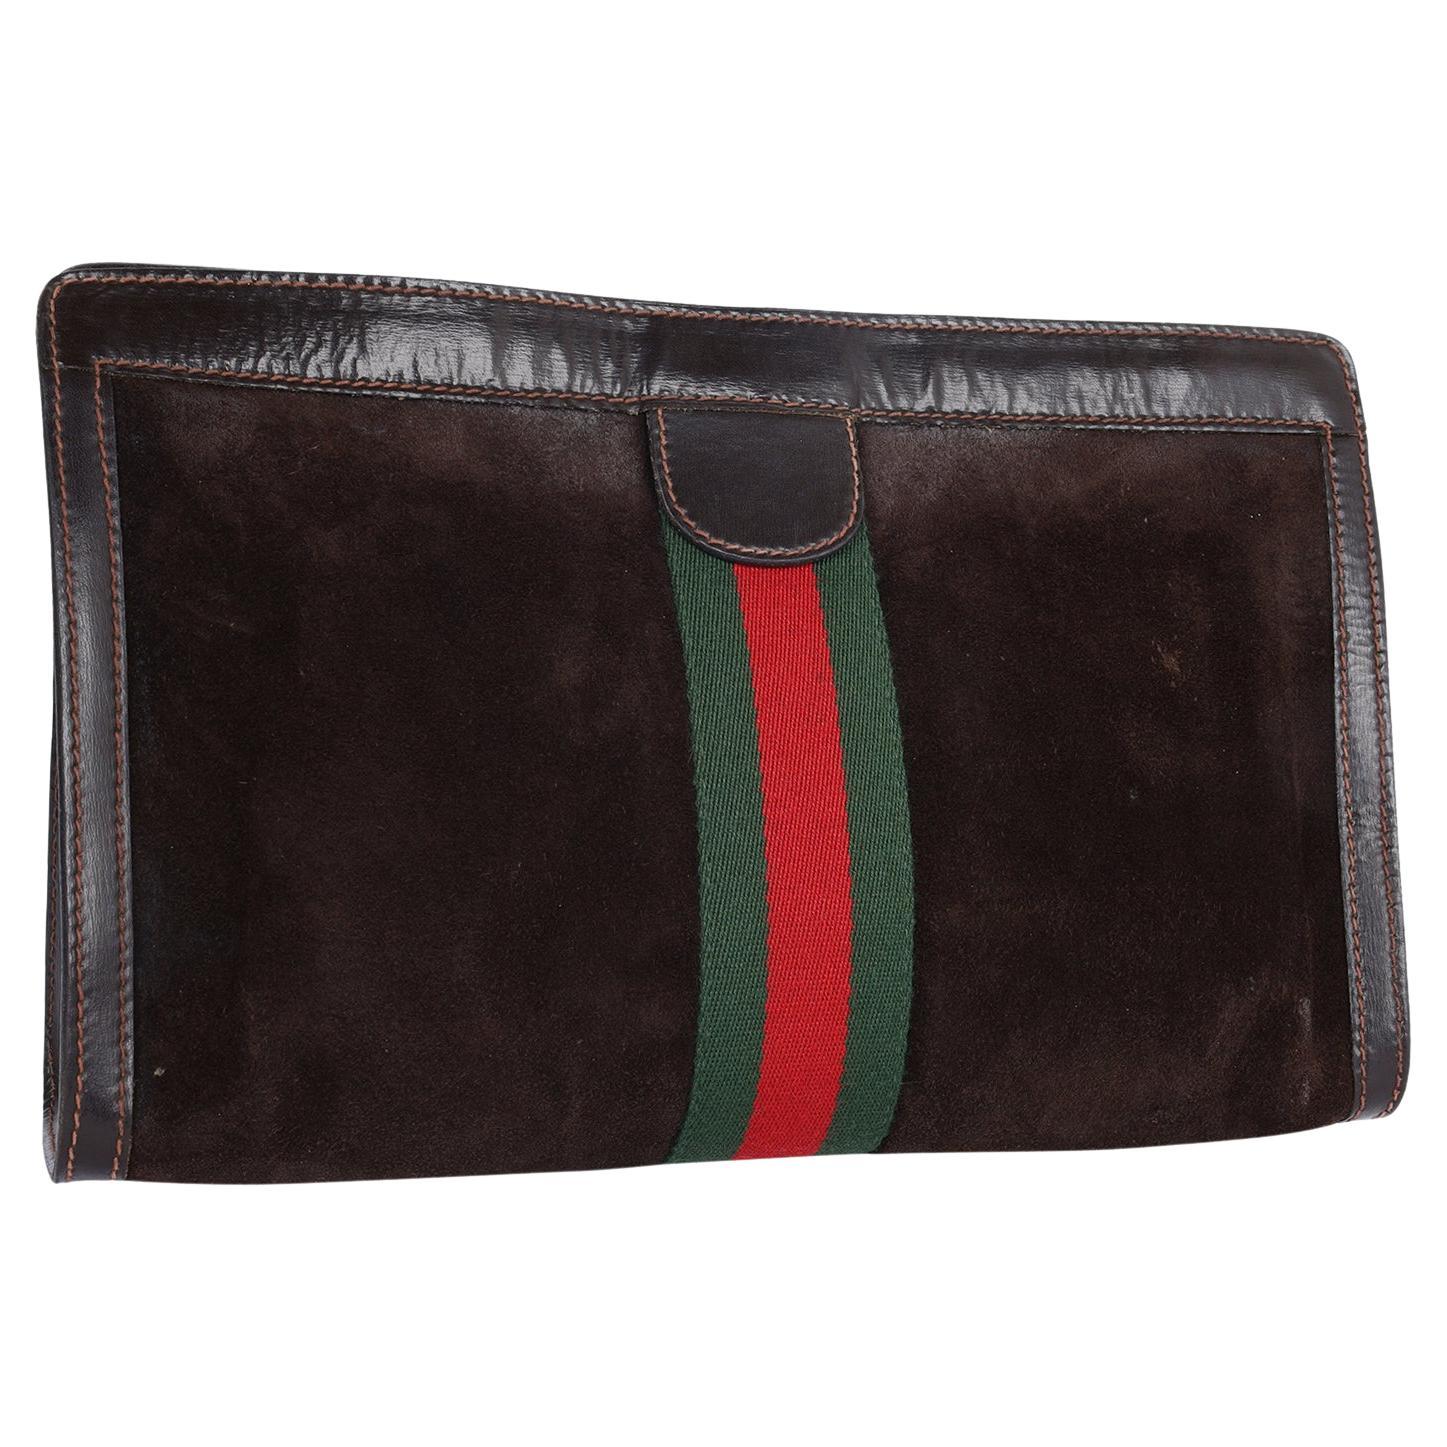 Authentic, pre-loved Gucci Brown Suede Leather Ophidia clutch or toiletry case. Features brown suede with leather trim, web design, velcro closure, large interior with waterproof lining. This is a marvelous cosmetics case that is practical and chic,